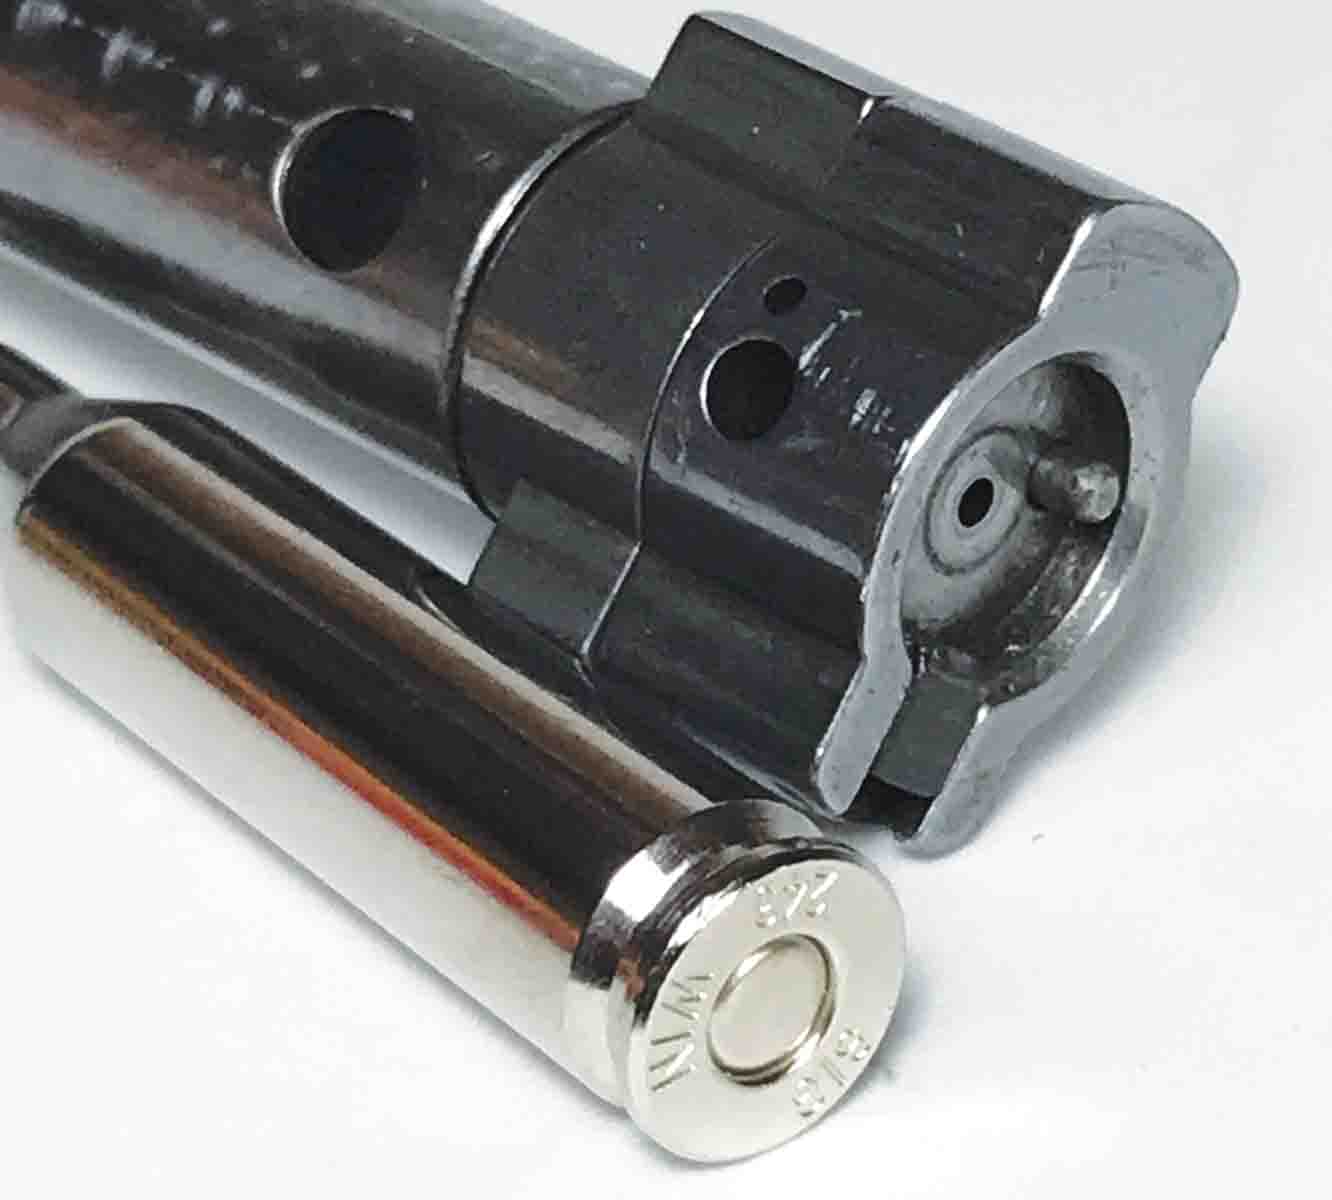 The bolt face is recessed on the Model 110 action and includes a sliding extractor and plunger ejector.